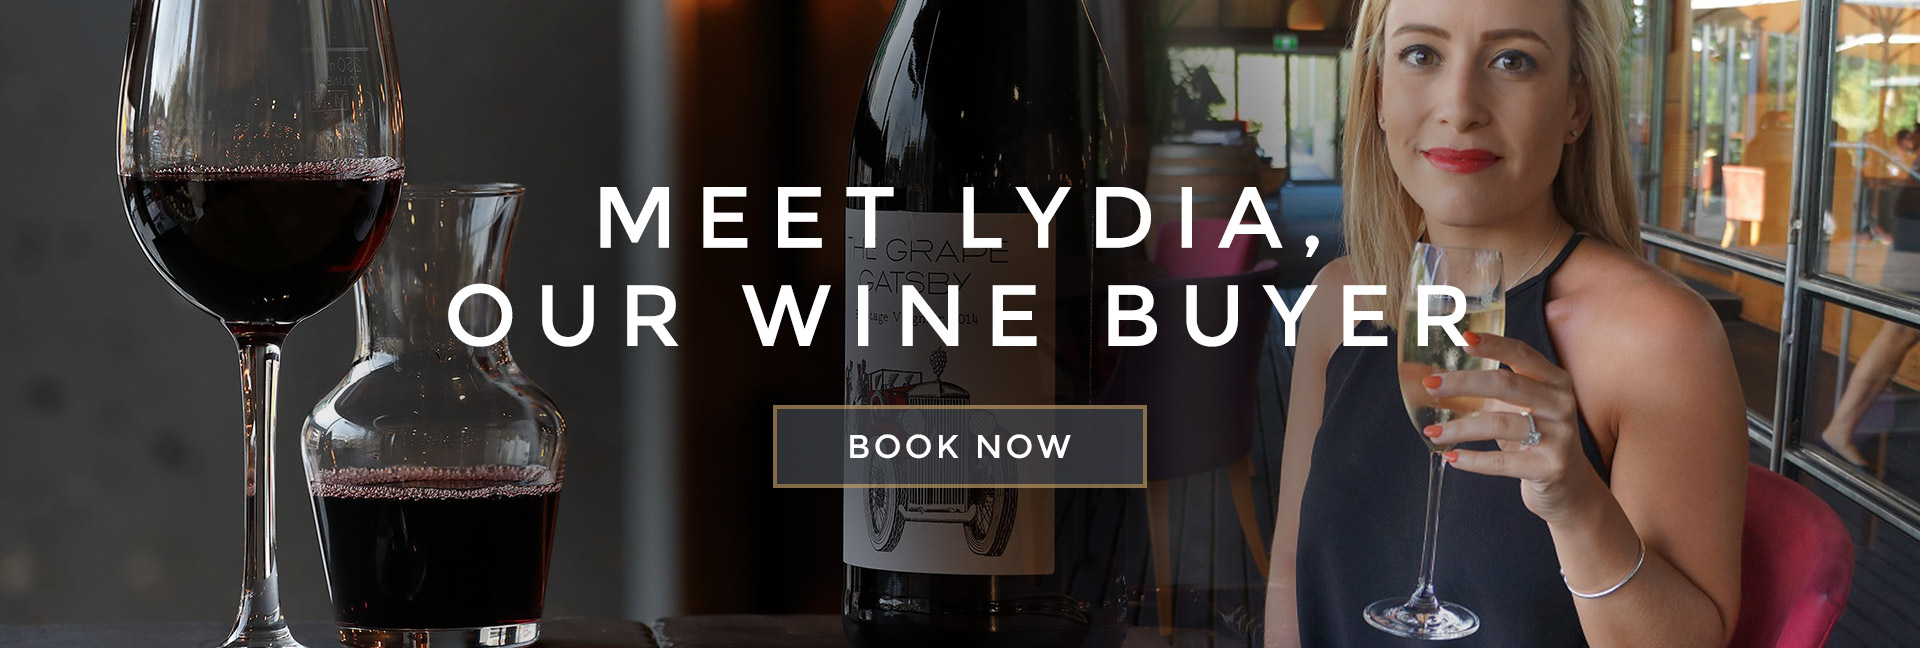 Meet Lydia, our wine buyer at All Bar One Brindleyplace